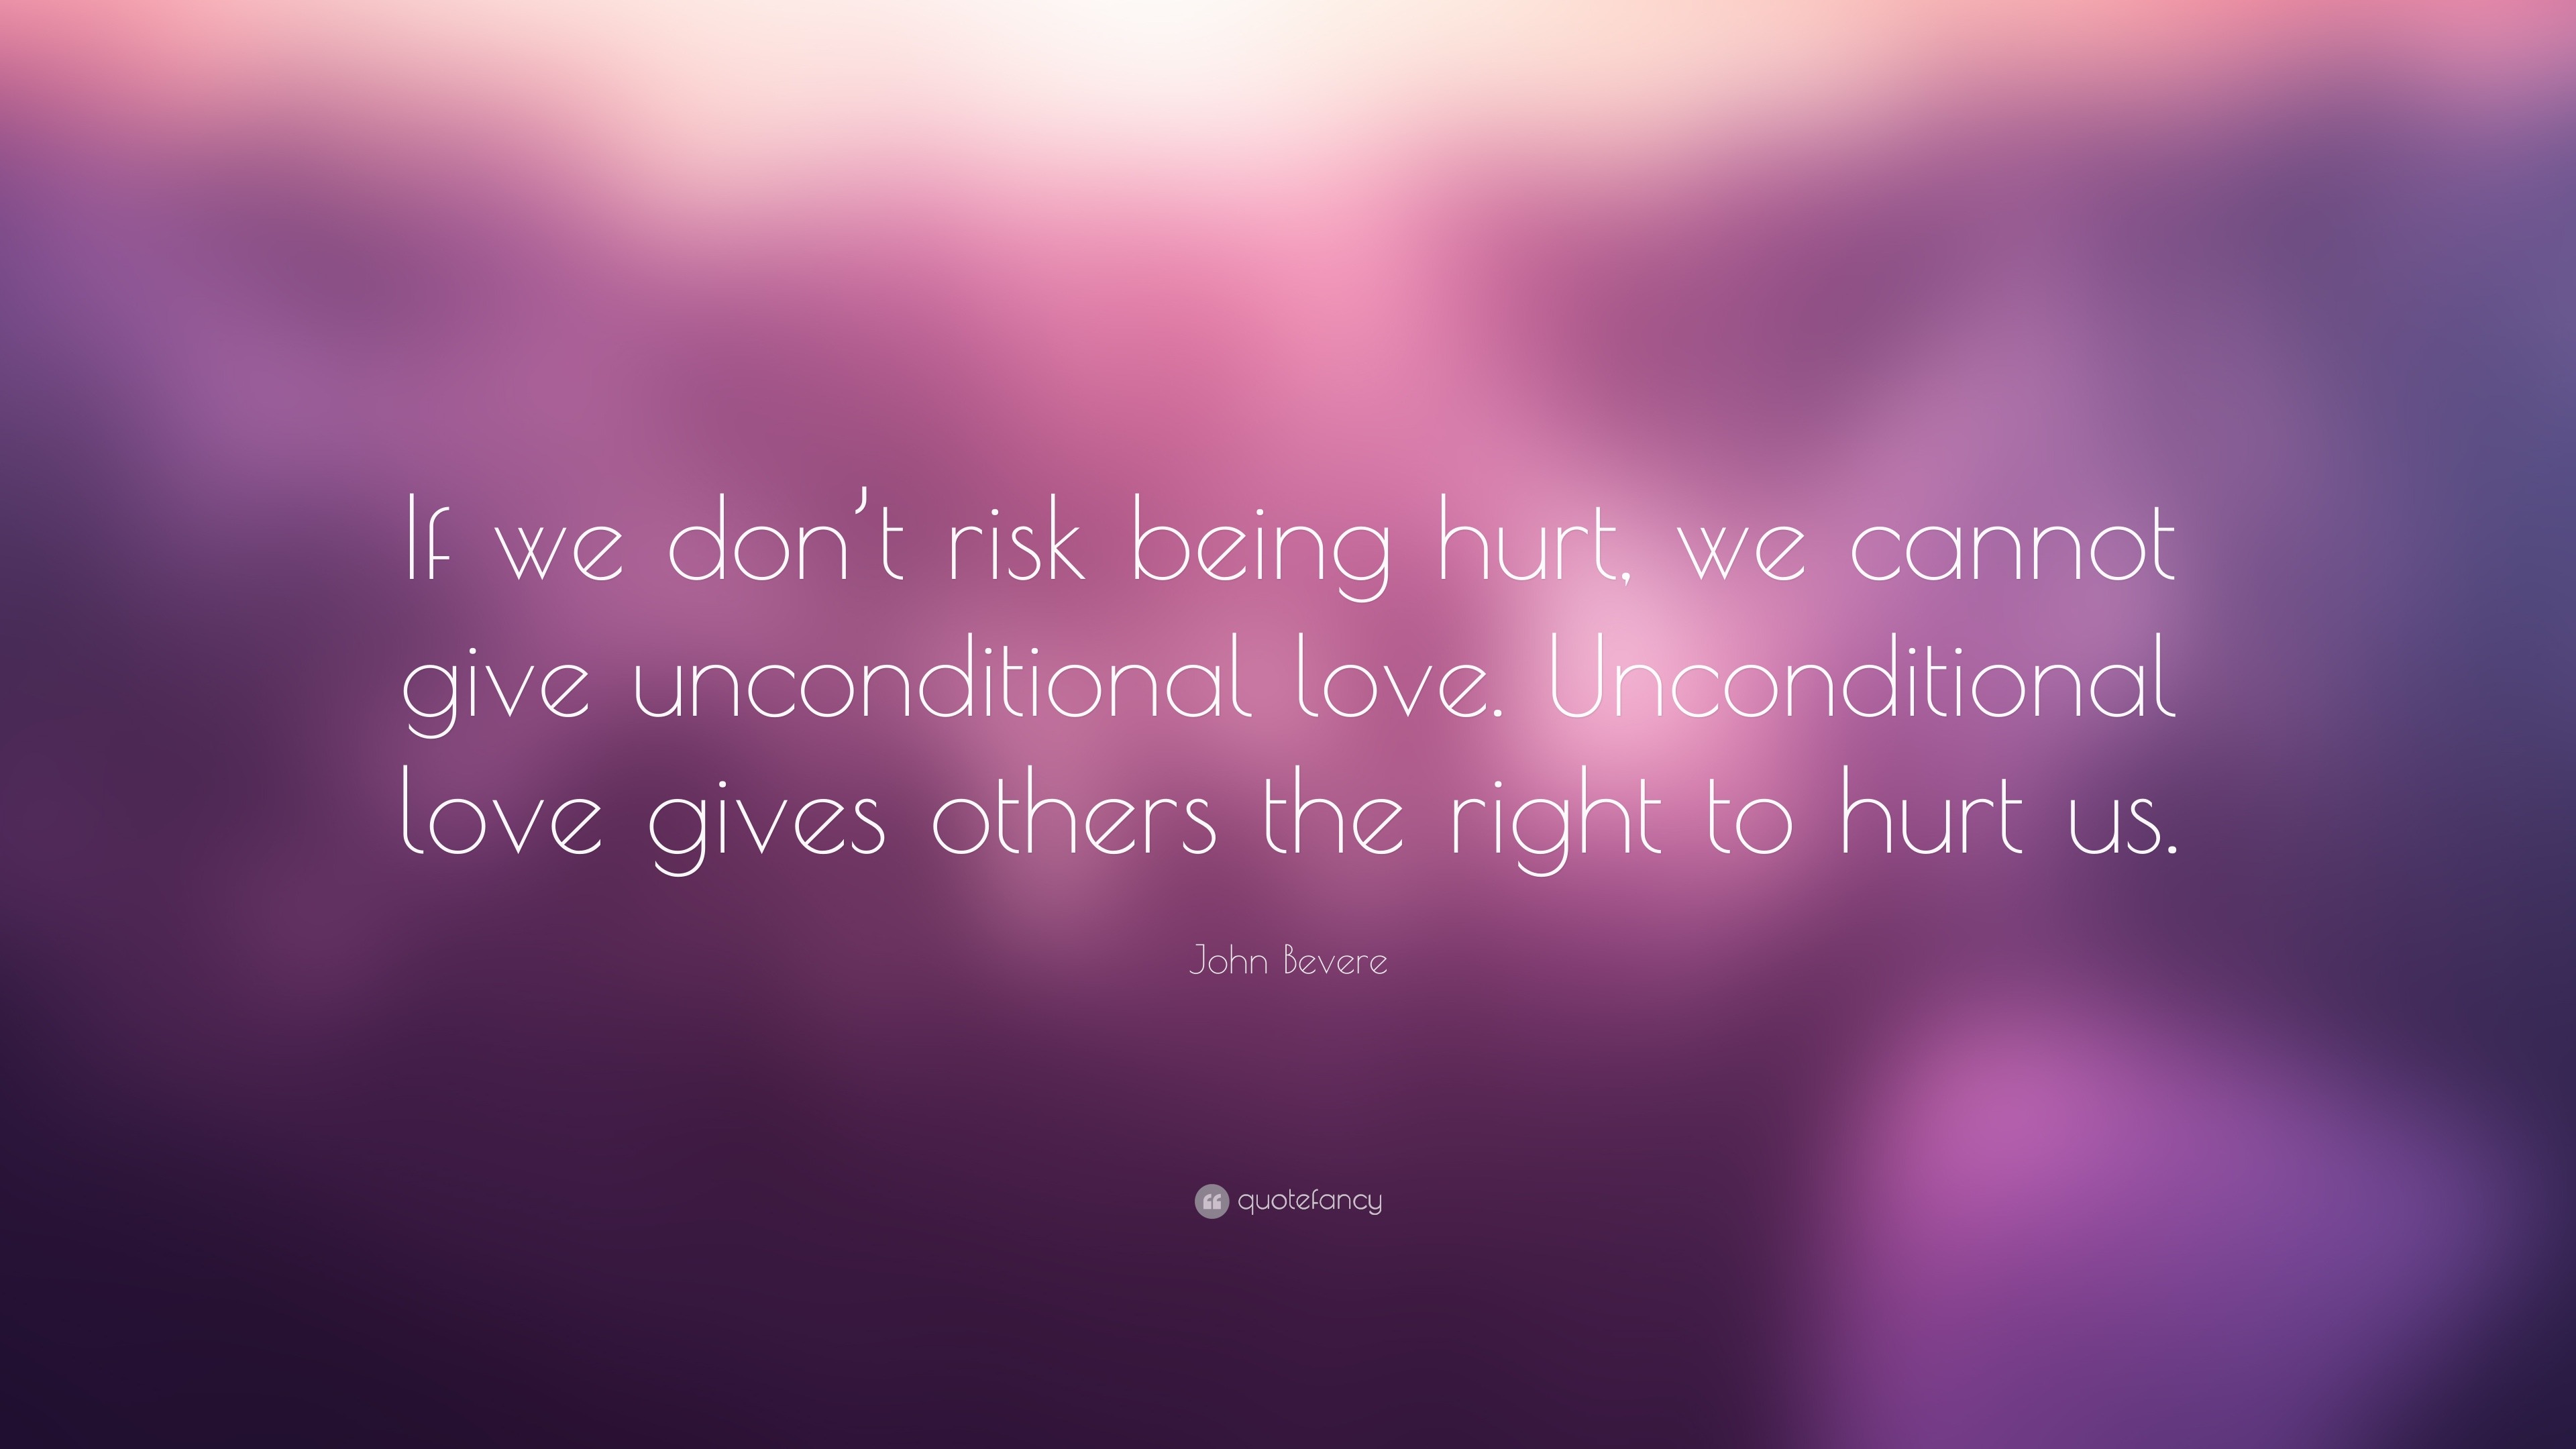 John Bevere Quote “If we don t risk being hurt we cannot